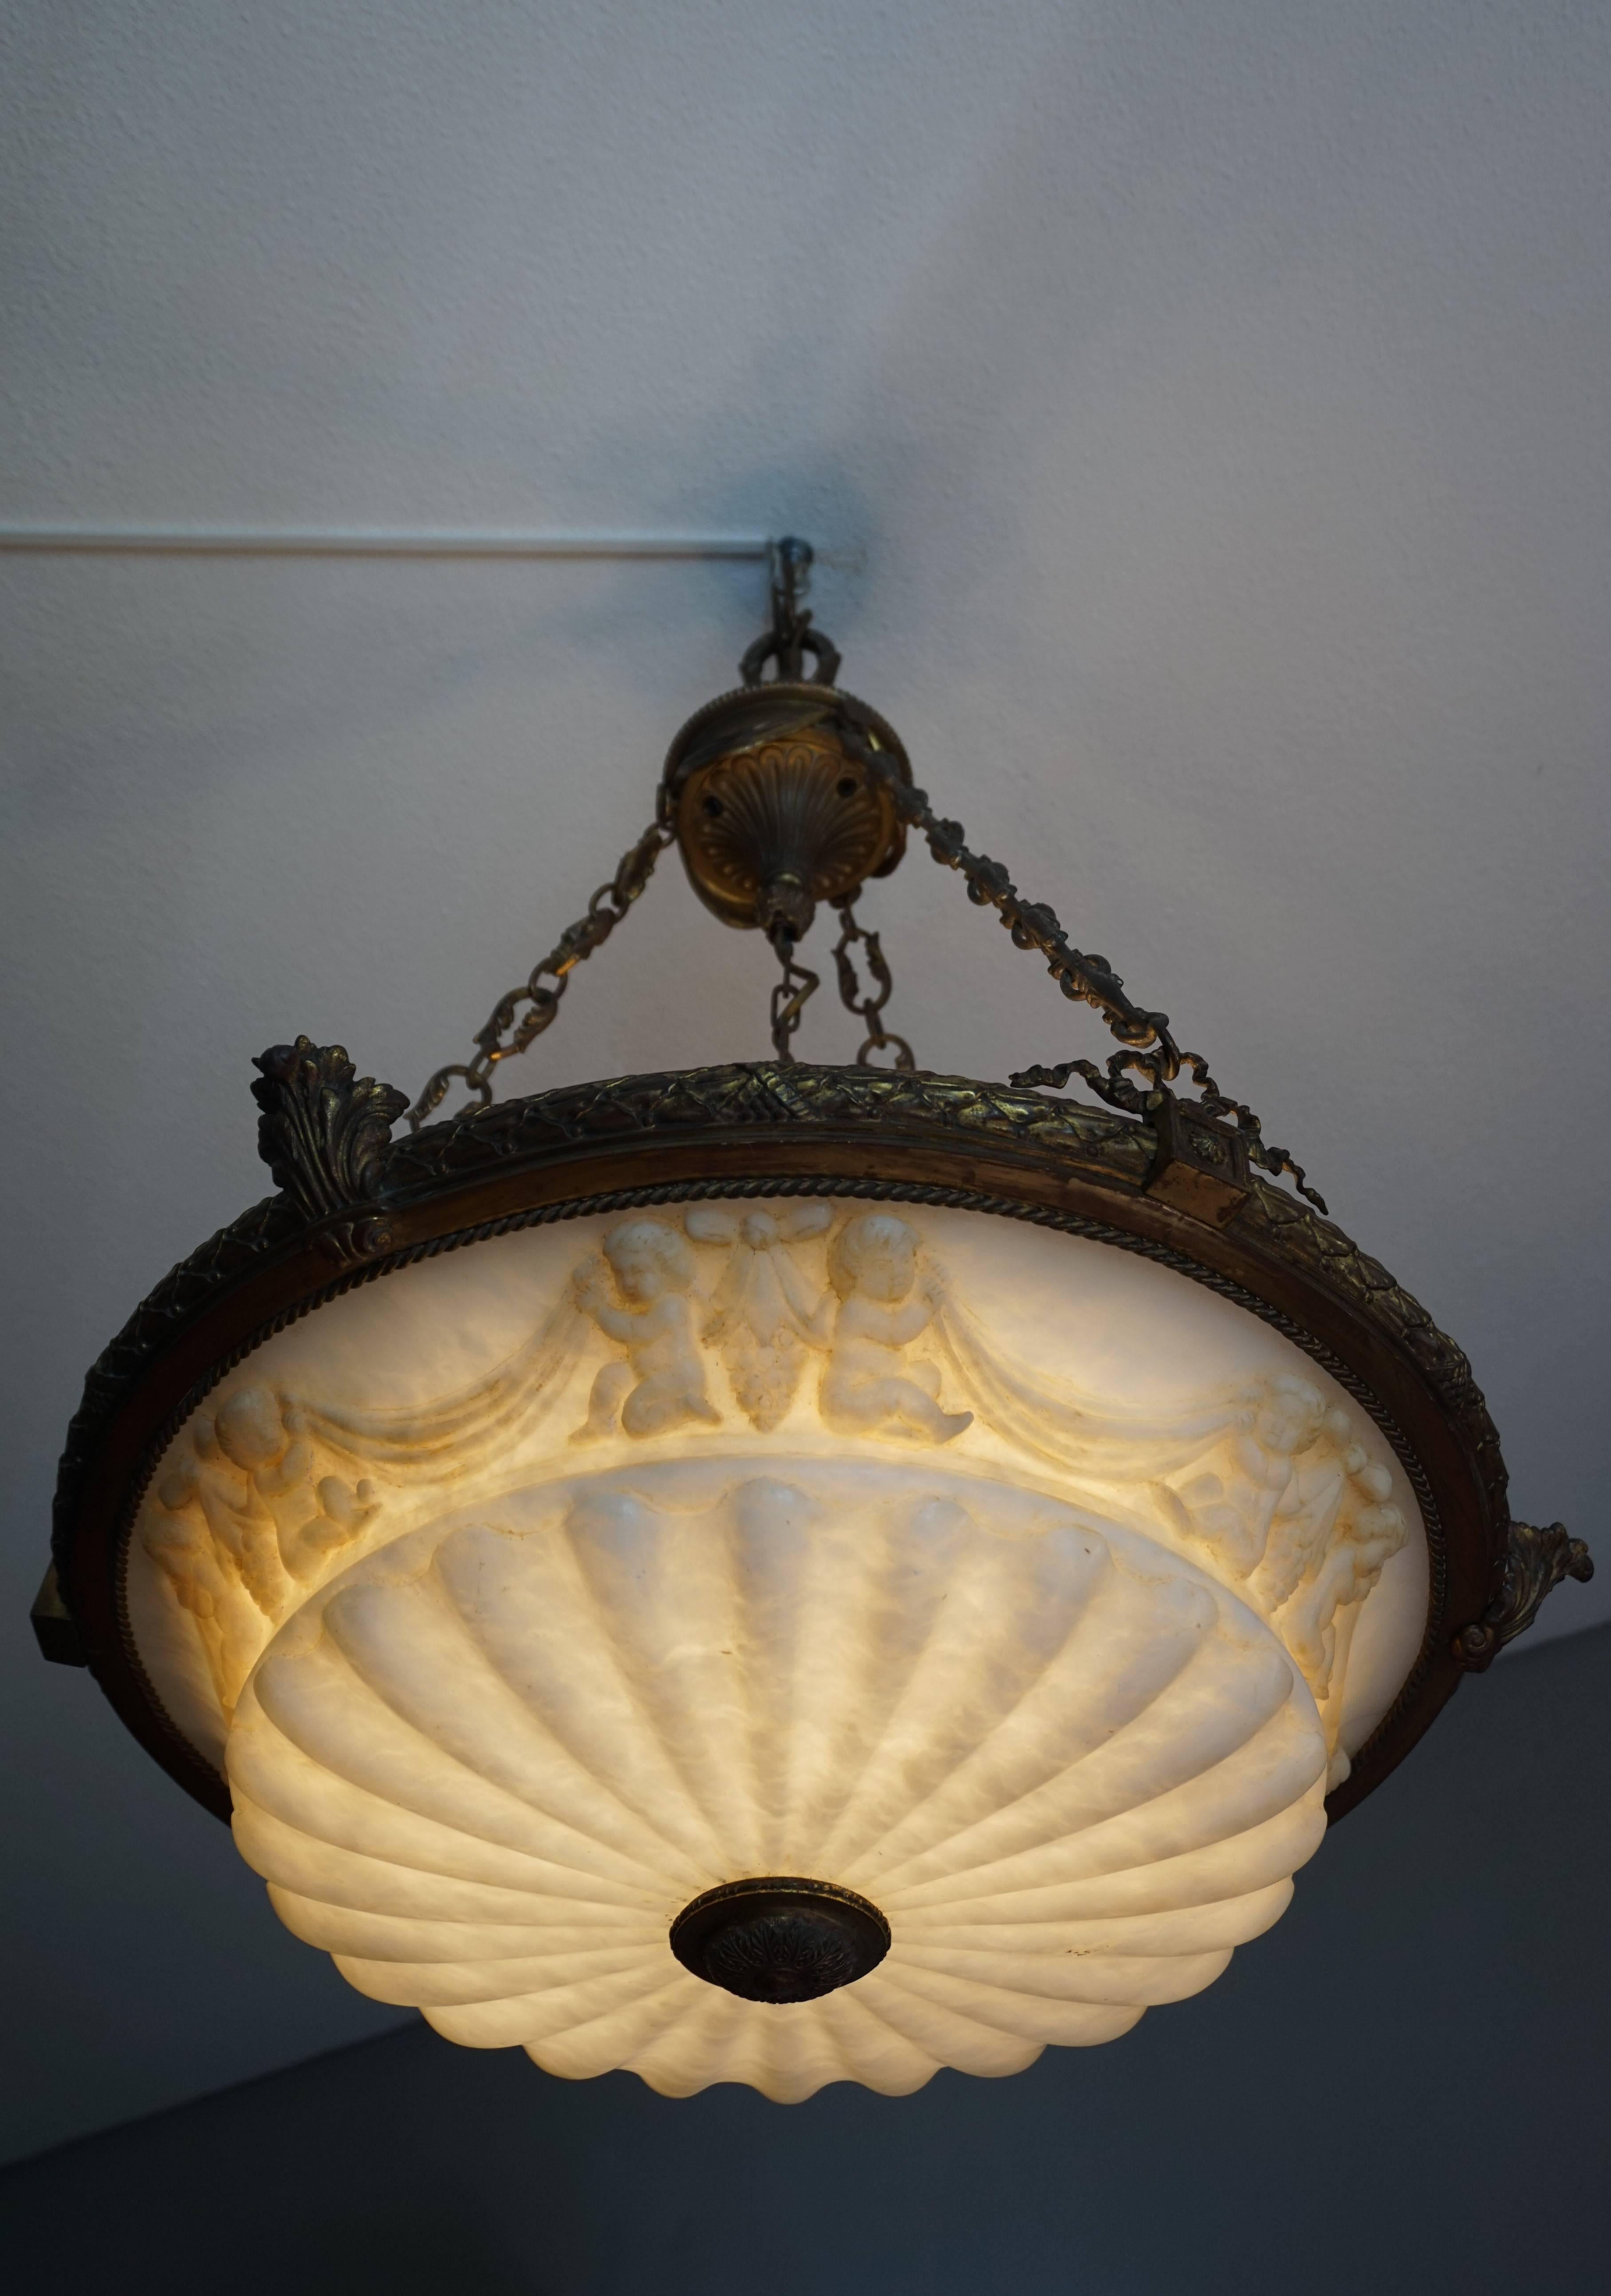 Five-light chandelier with a marvelous alabaster shade and three removable, double candalabras.

We salvaged this large and majestic pendant from a house that was built in the 1880s. It was hanging from a 12 feet high entrance ceiling and we